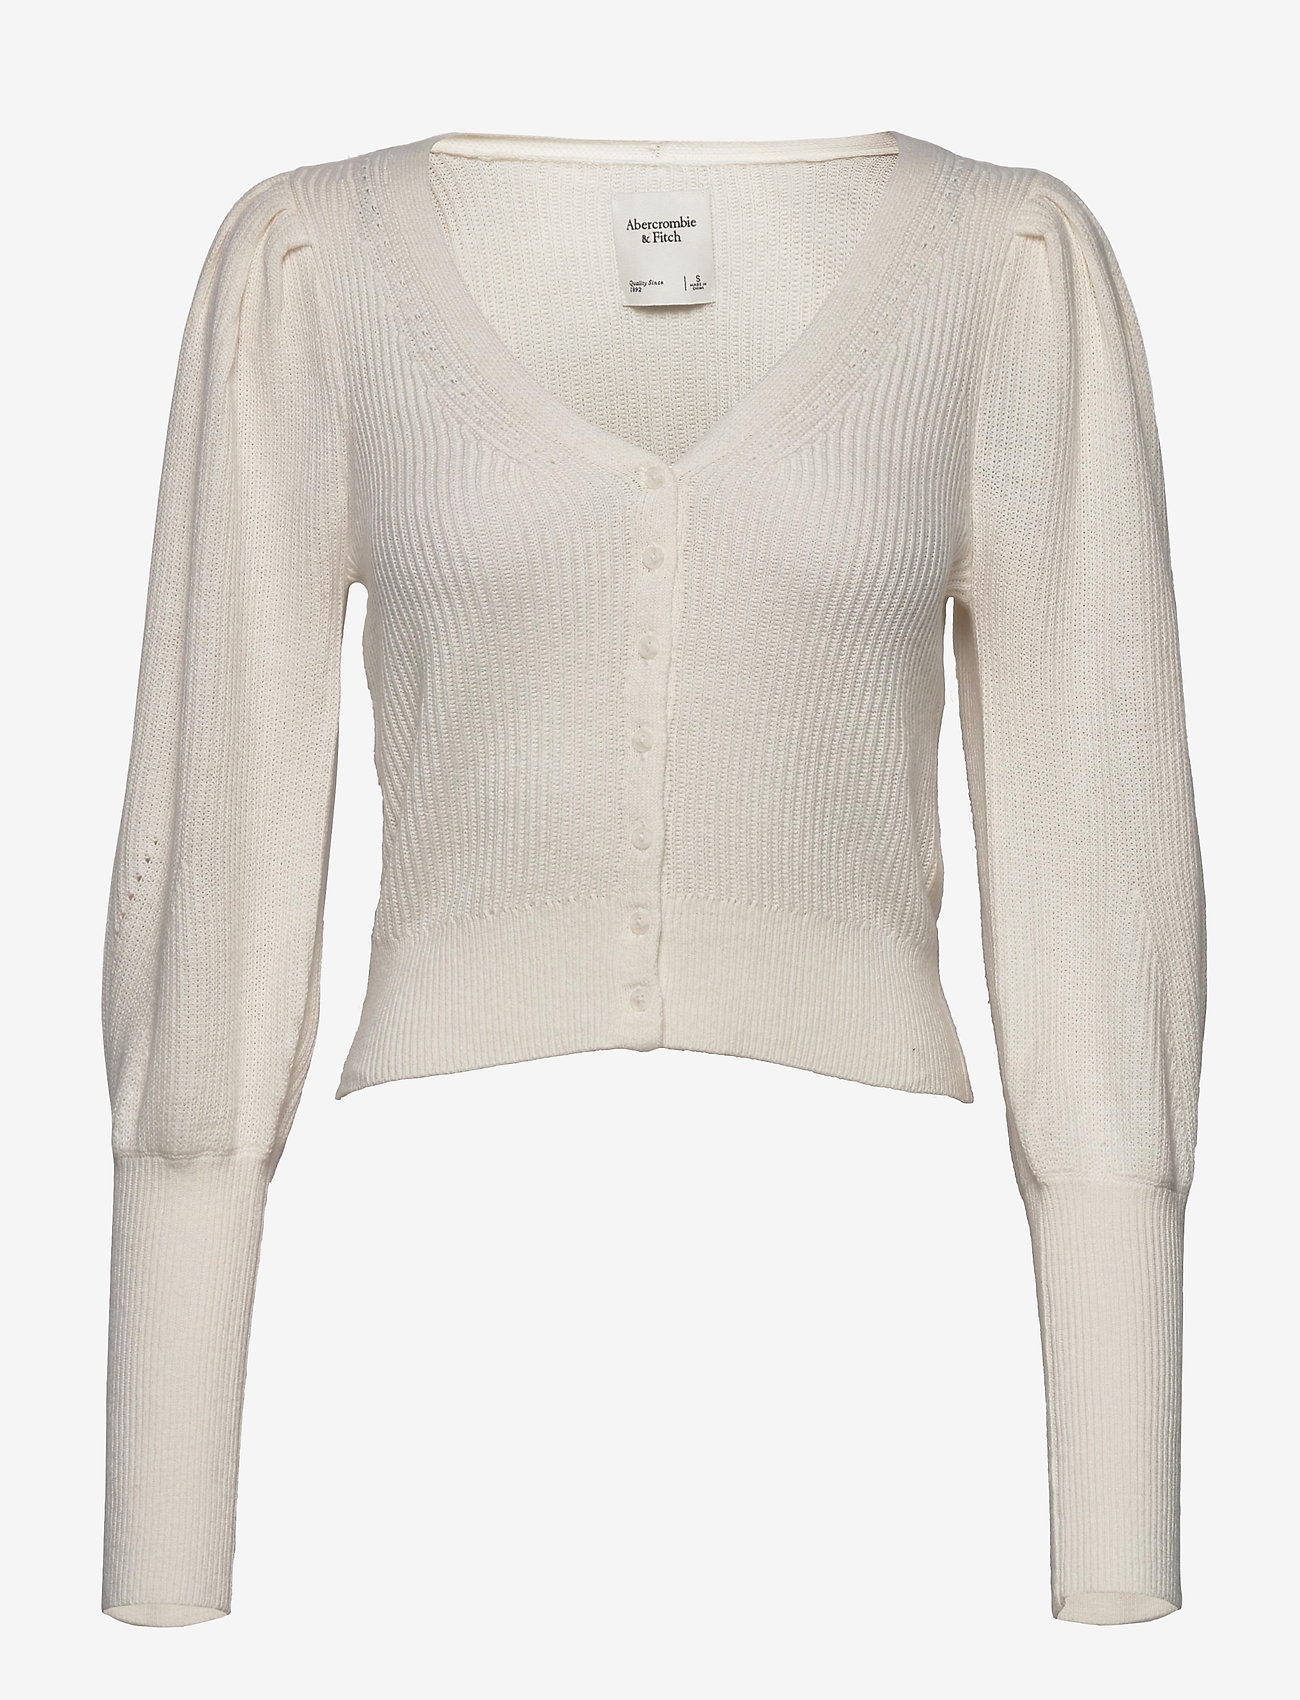 abercrombie and fitch womens sweaters